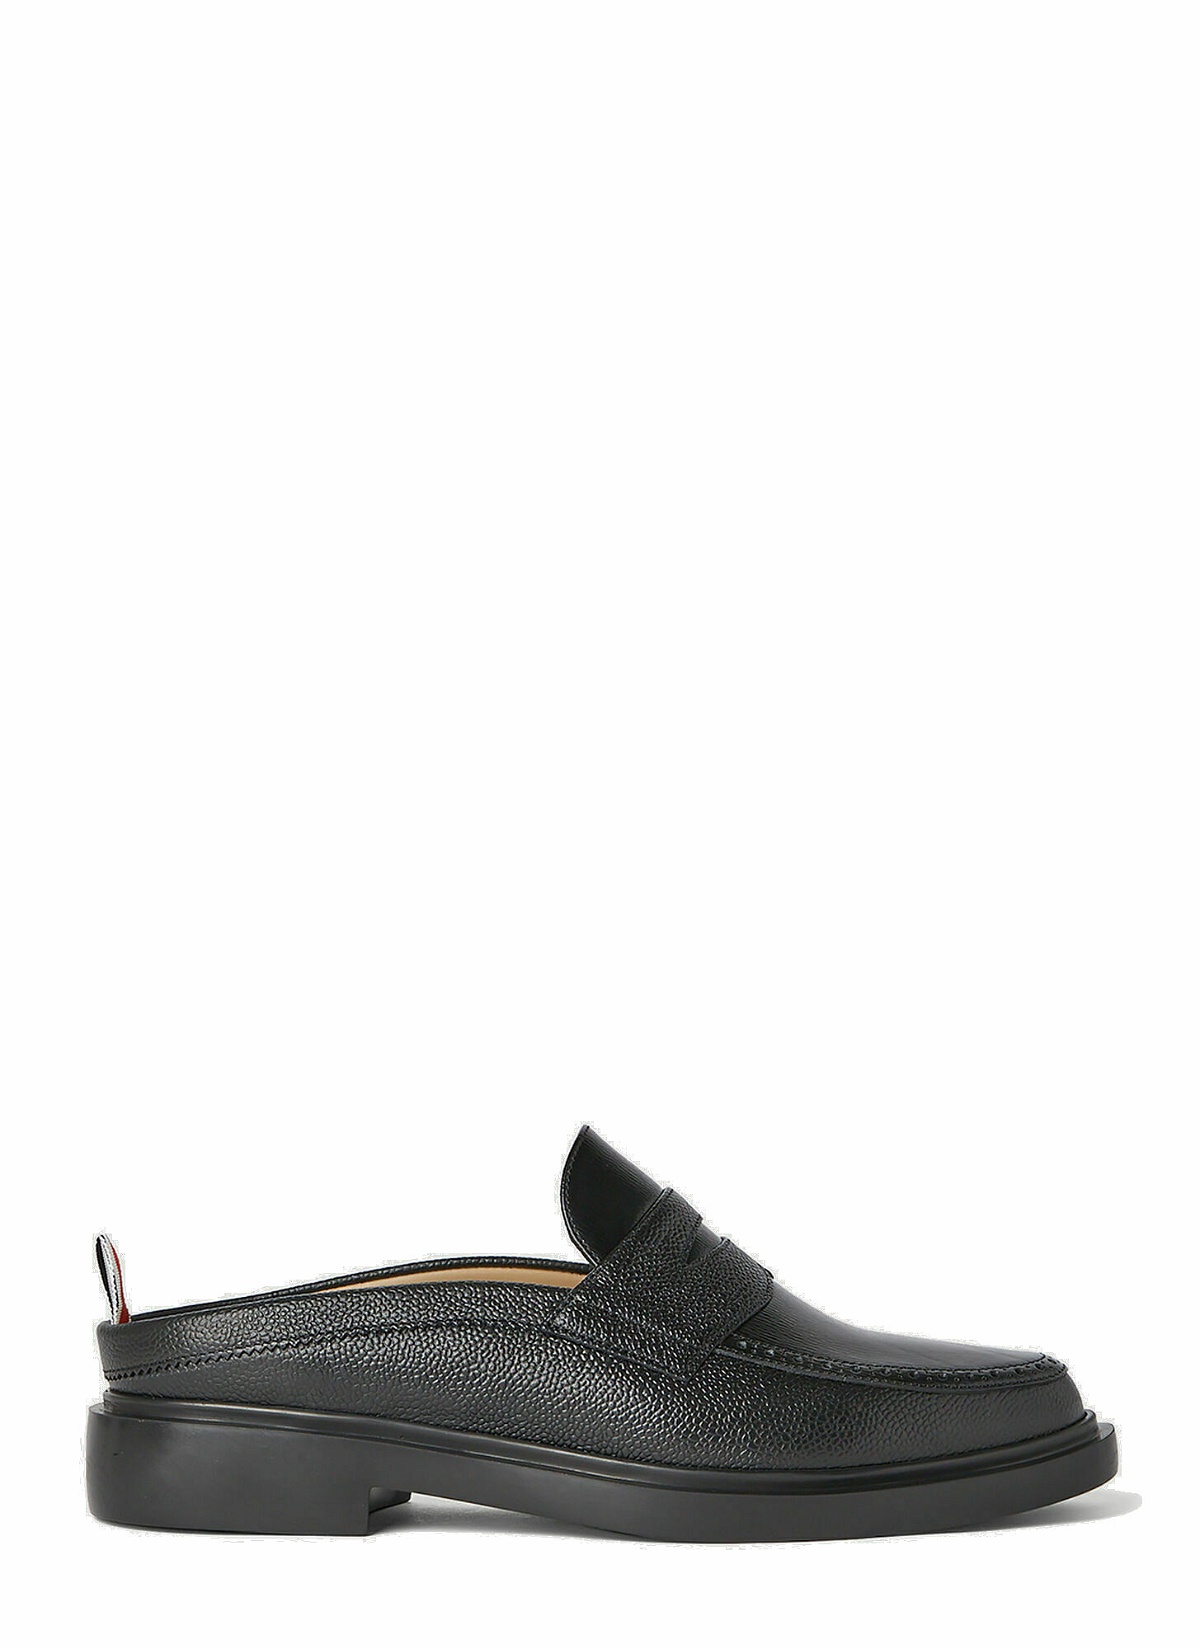 Photo: Thom Browne - Penny Loafers in Black